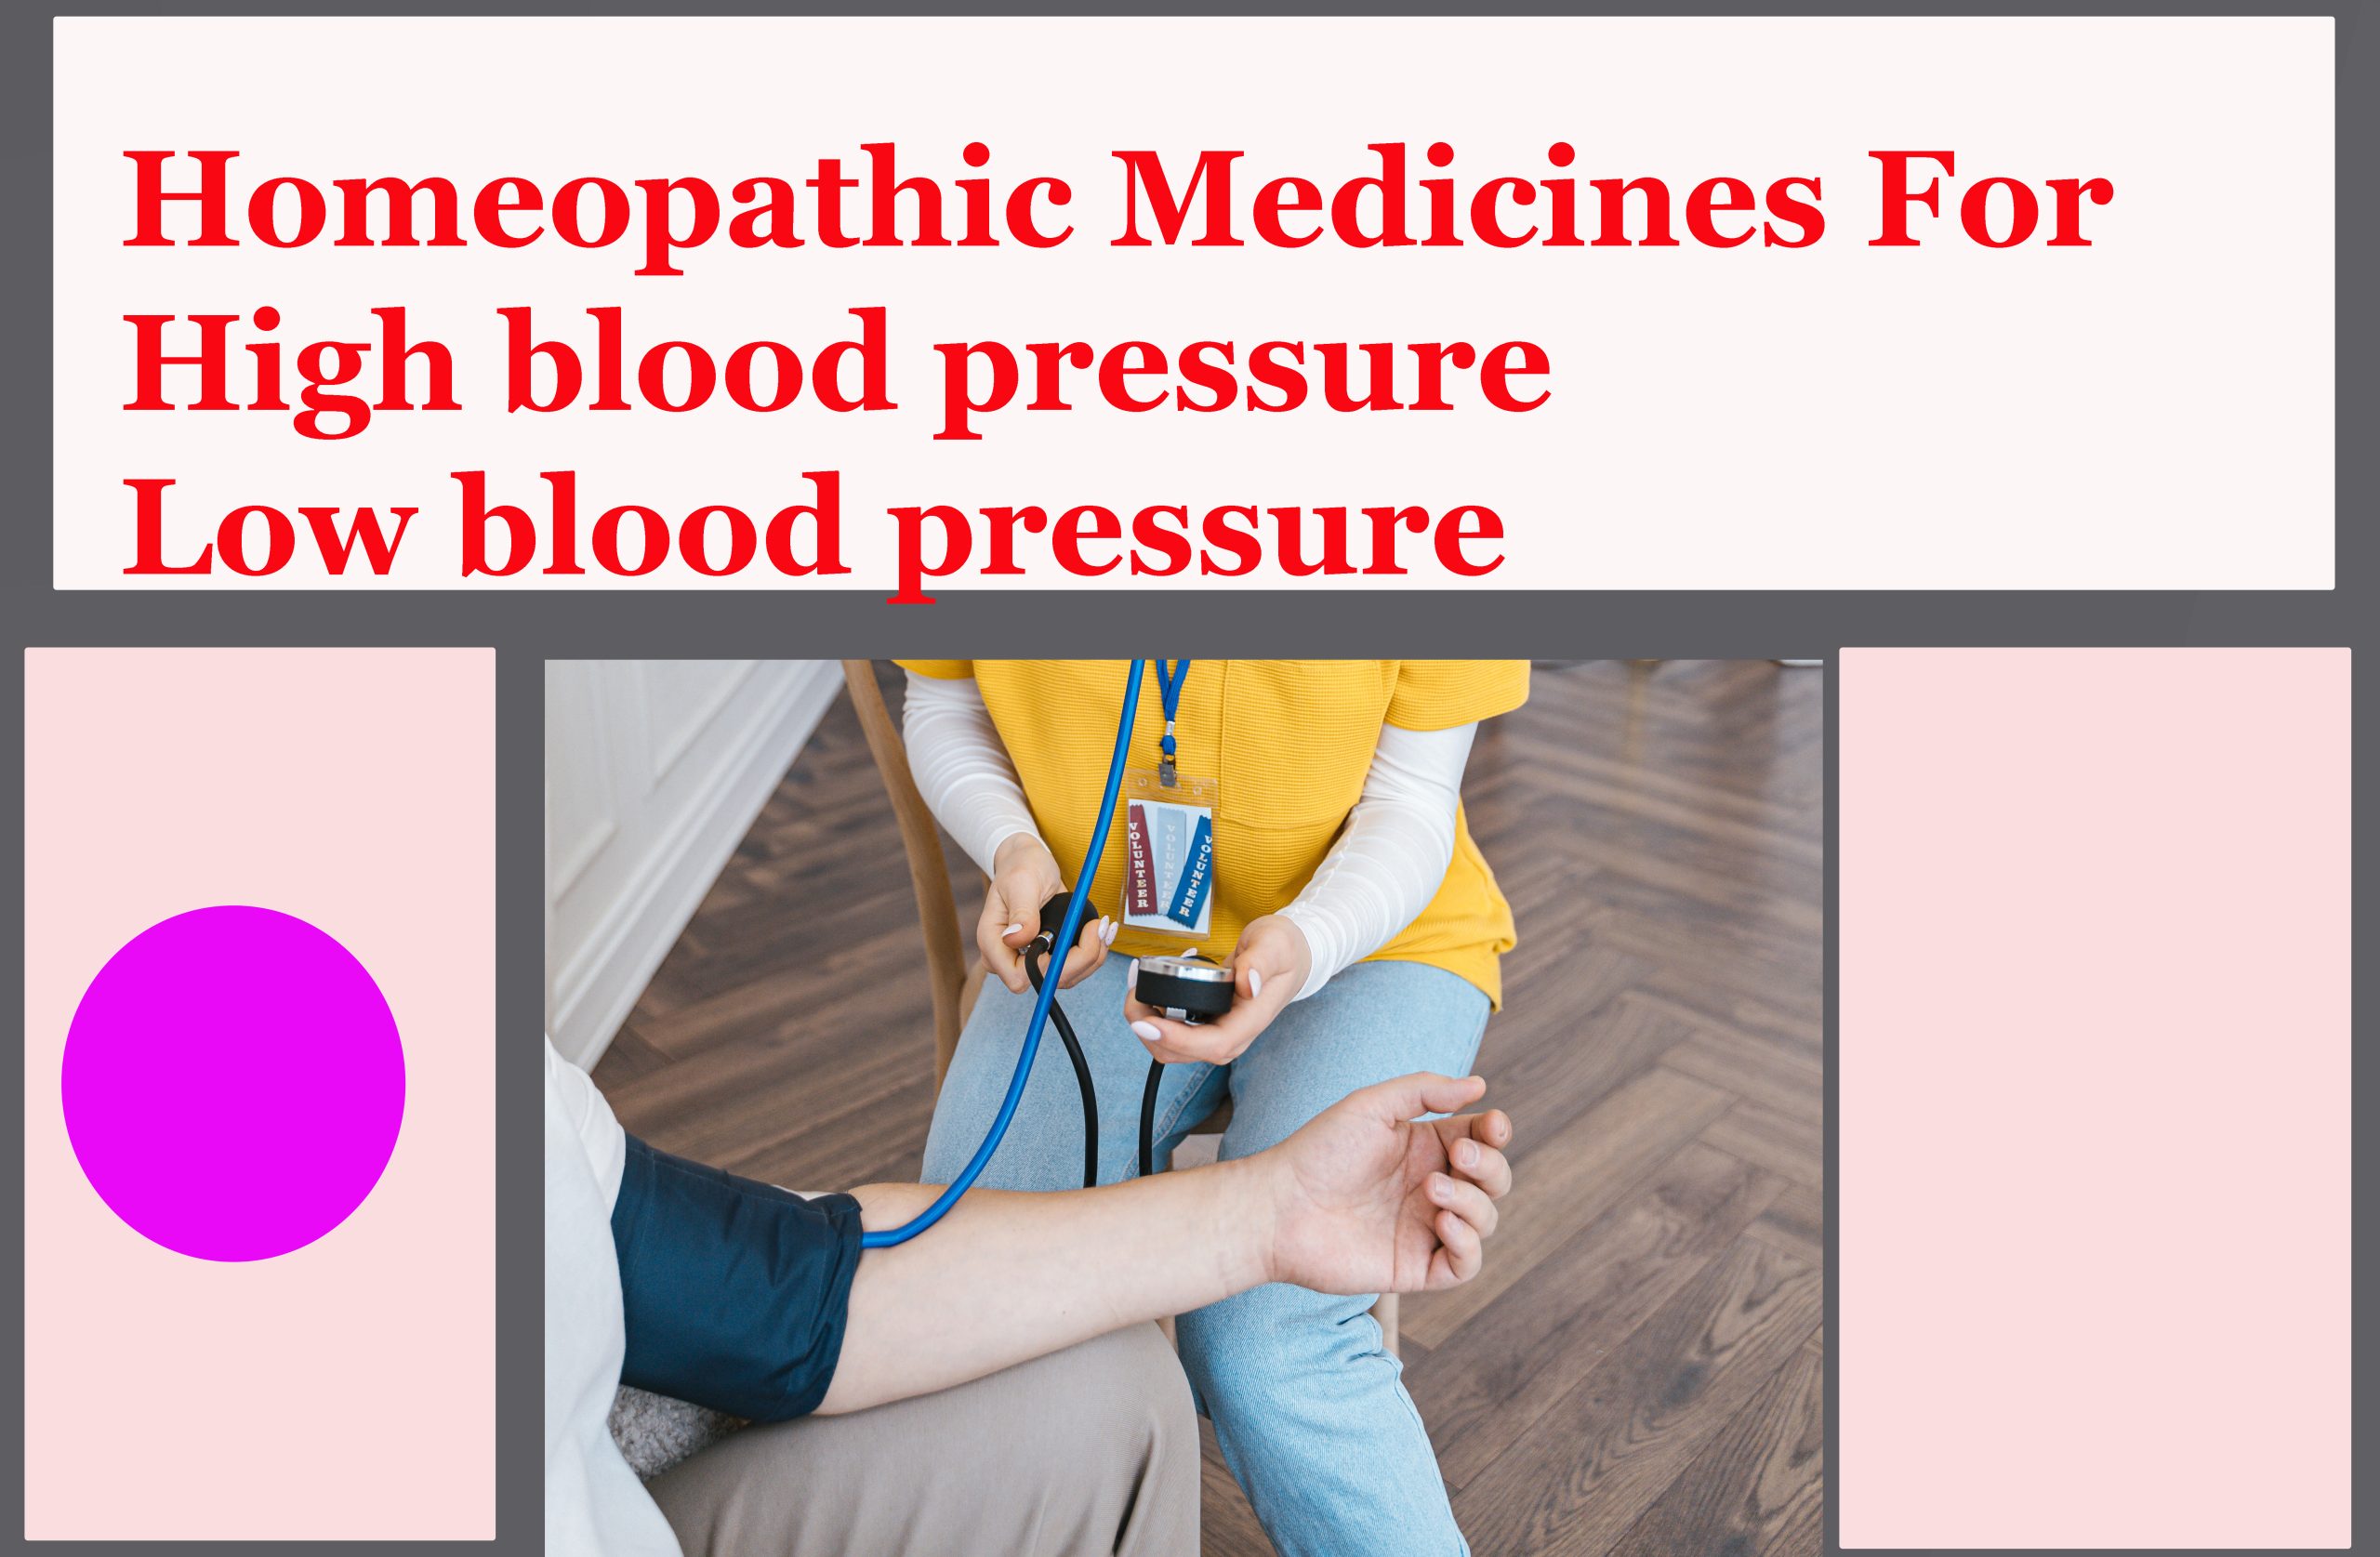 Homeopathic Medicines For High blood pressure Low blood pressure